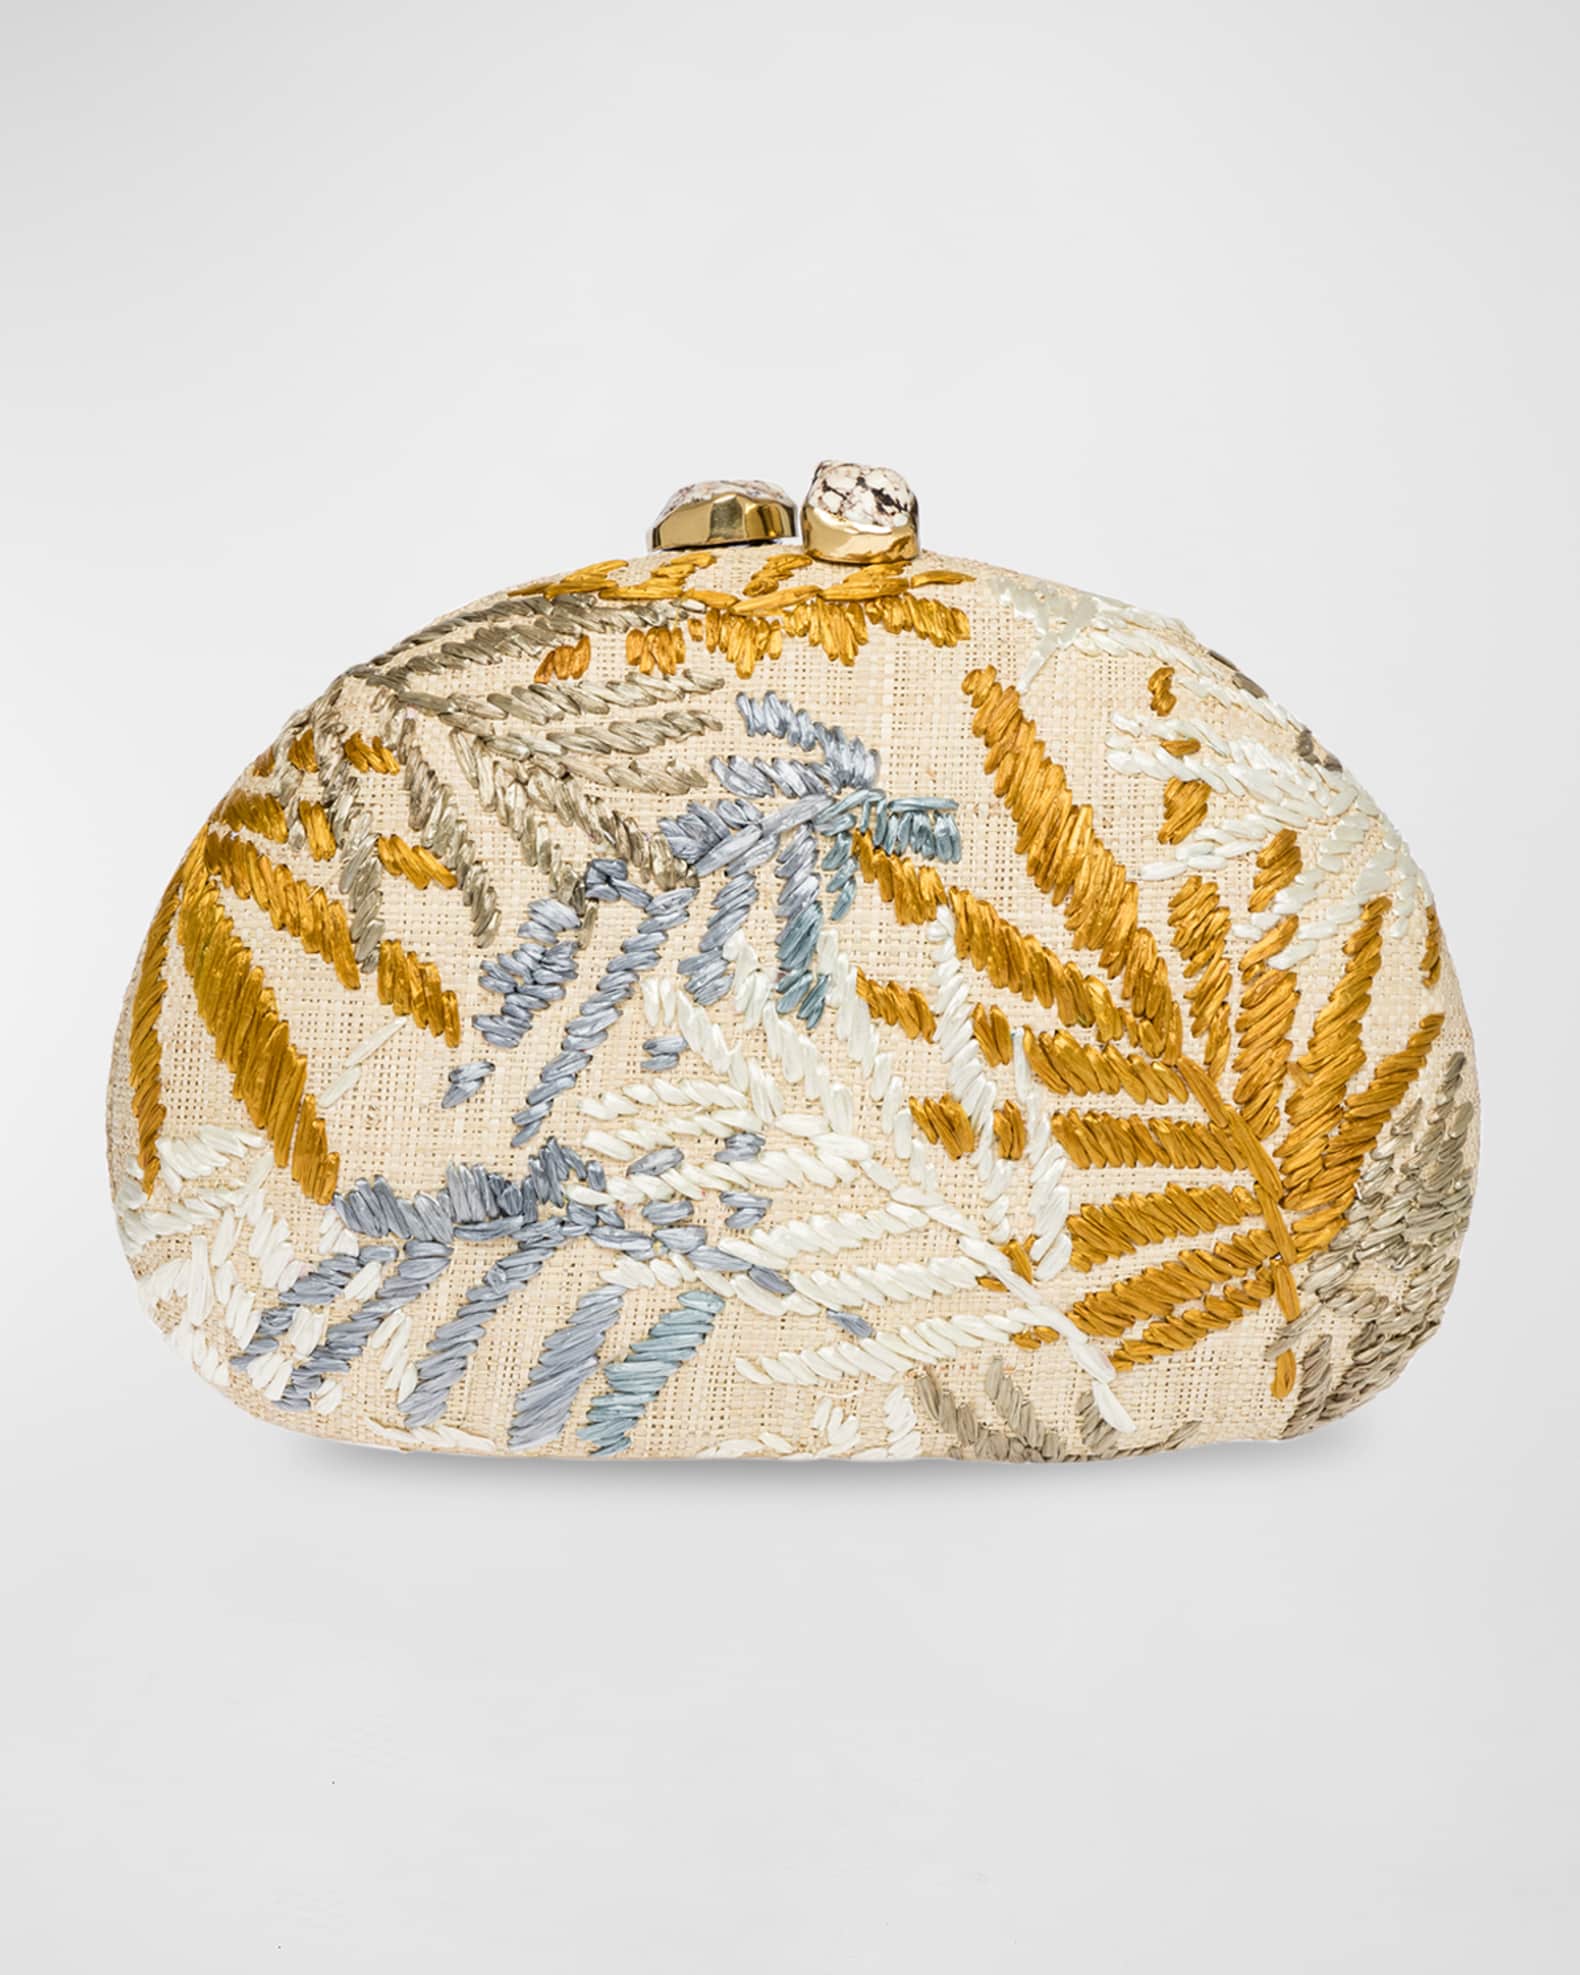 Rafe Berna Embroidered Palm Leaves Straw Clutch Bag Natural / Gold